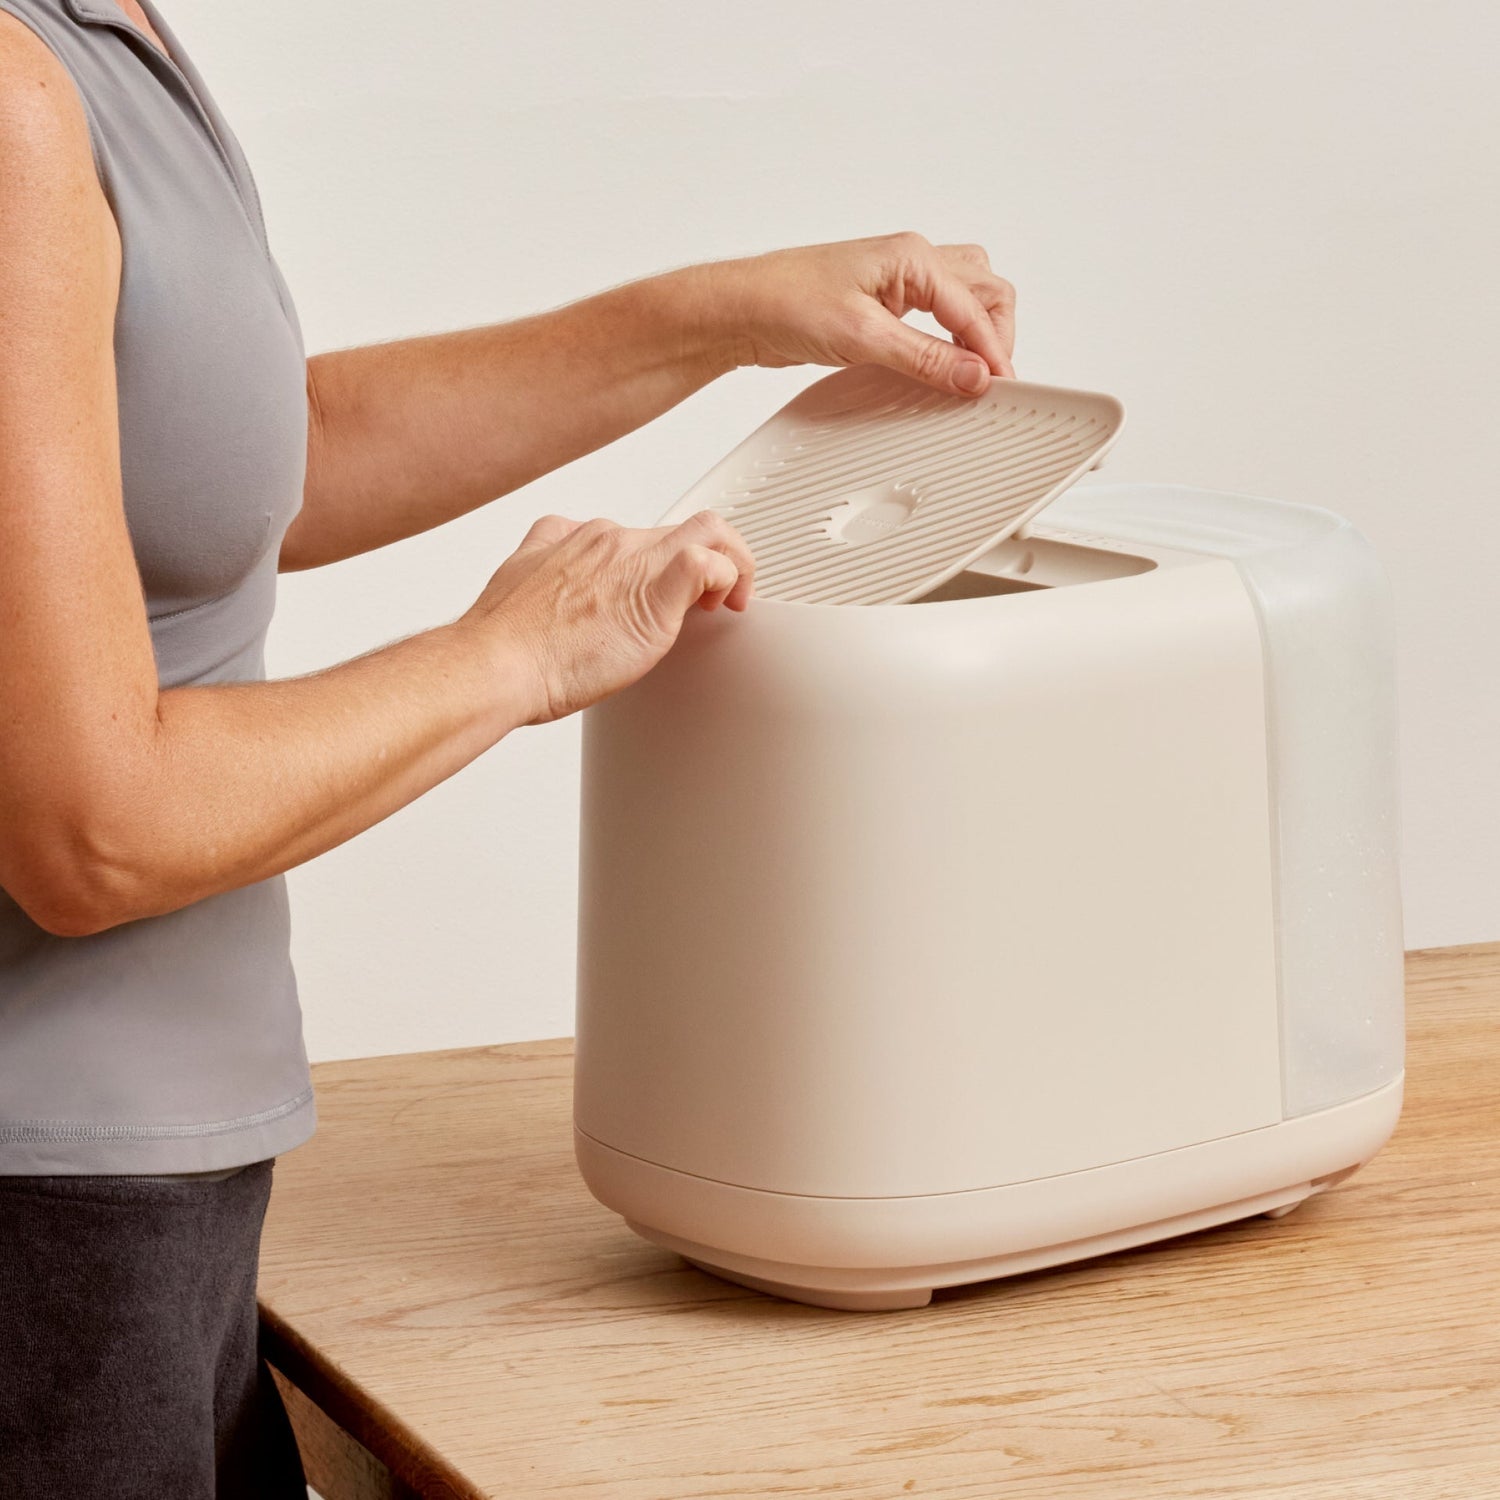 Large Room Humidifier | Lifestyle, Woman lifting the grate off the device